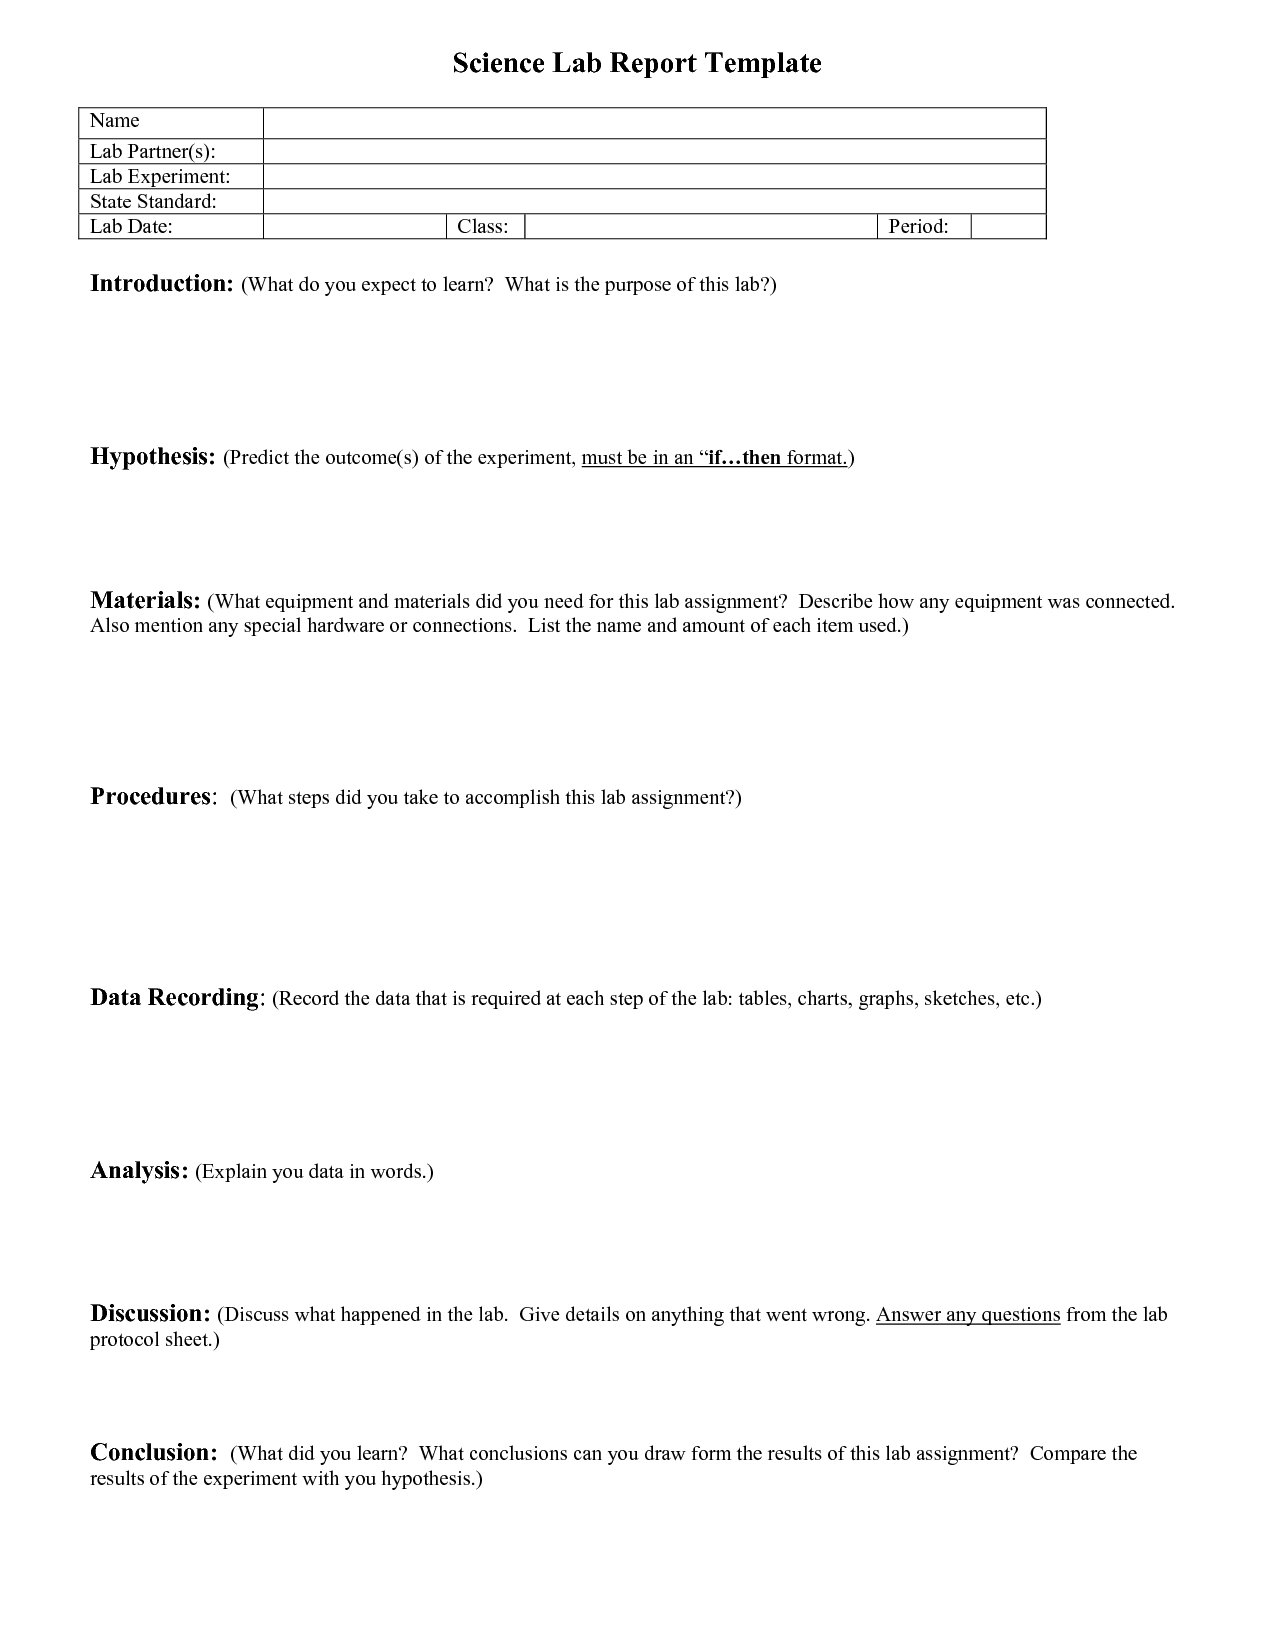 Lab Report Outline | Science Lab Report Template | School Throughout Science Lab Report Template